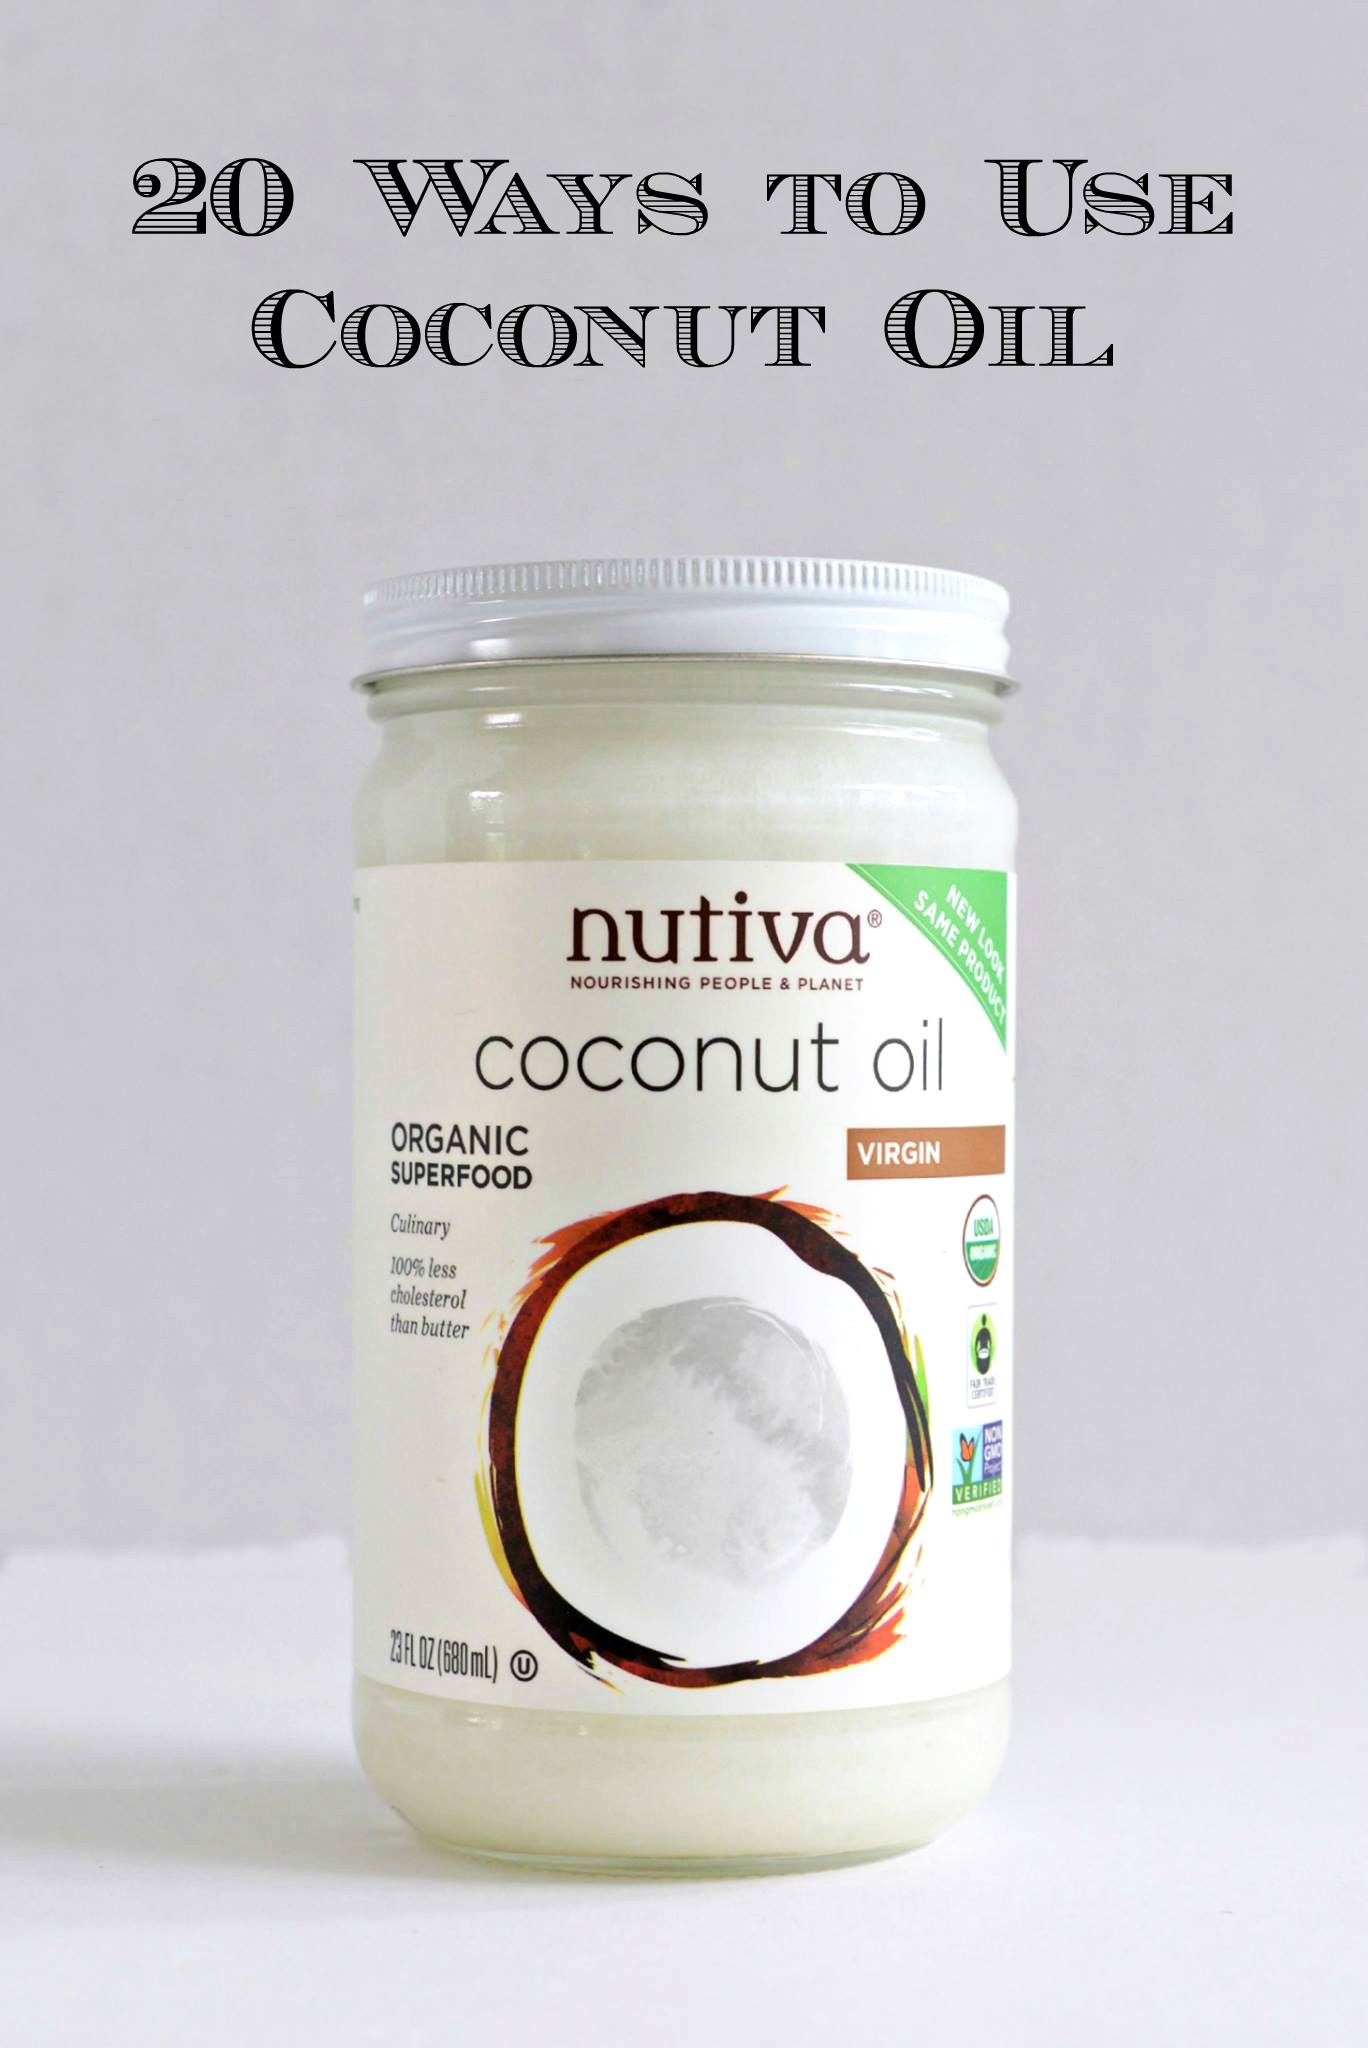 20 Ways to Use Coconut Oil: An organic superfood